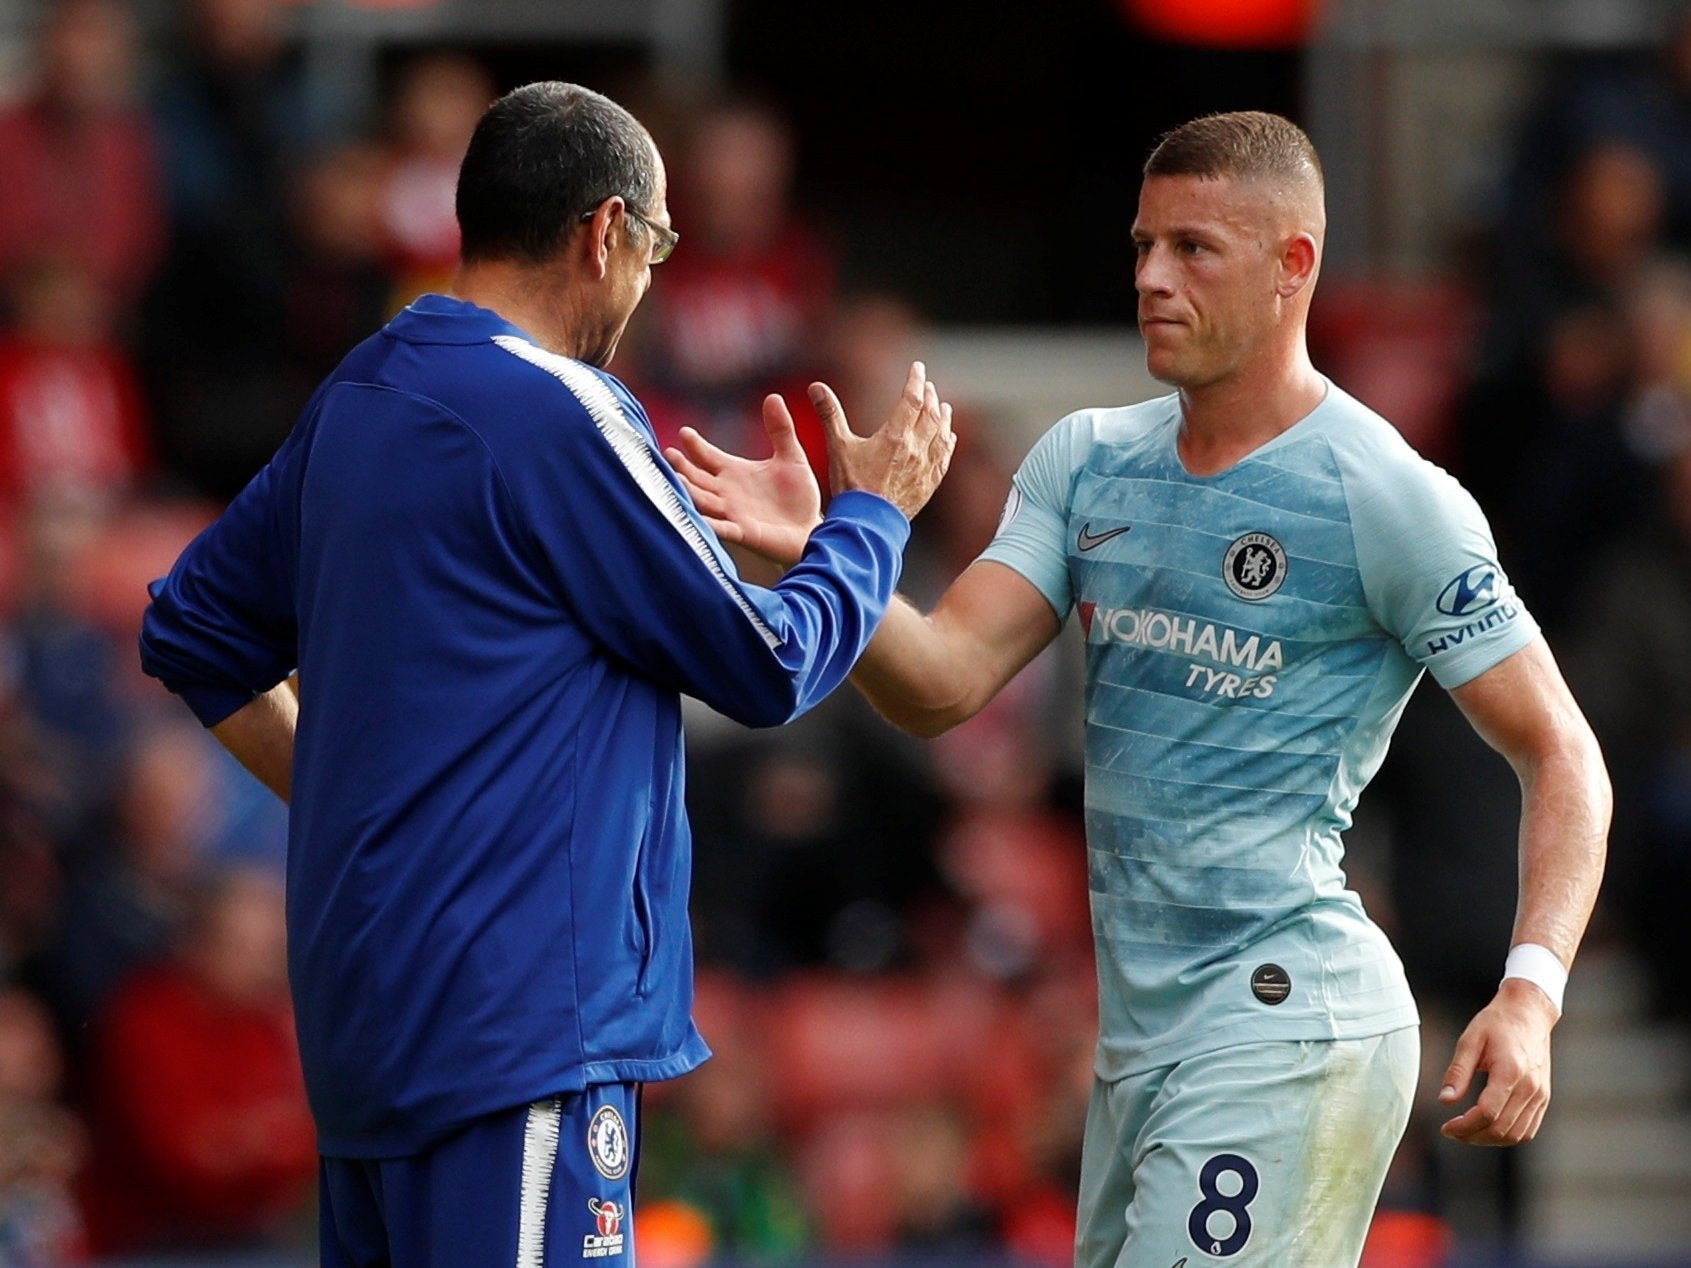 Ross Barkley gets a handshake from his manager